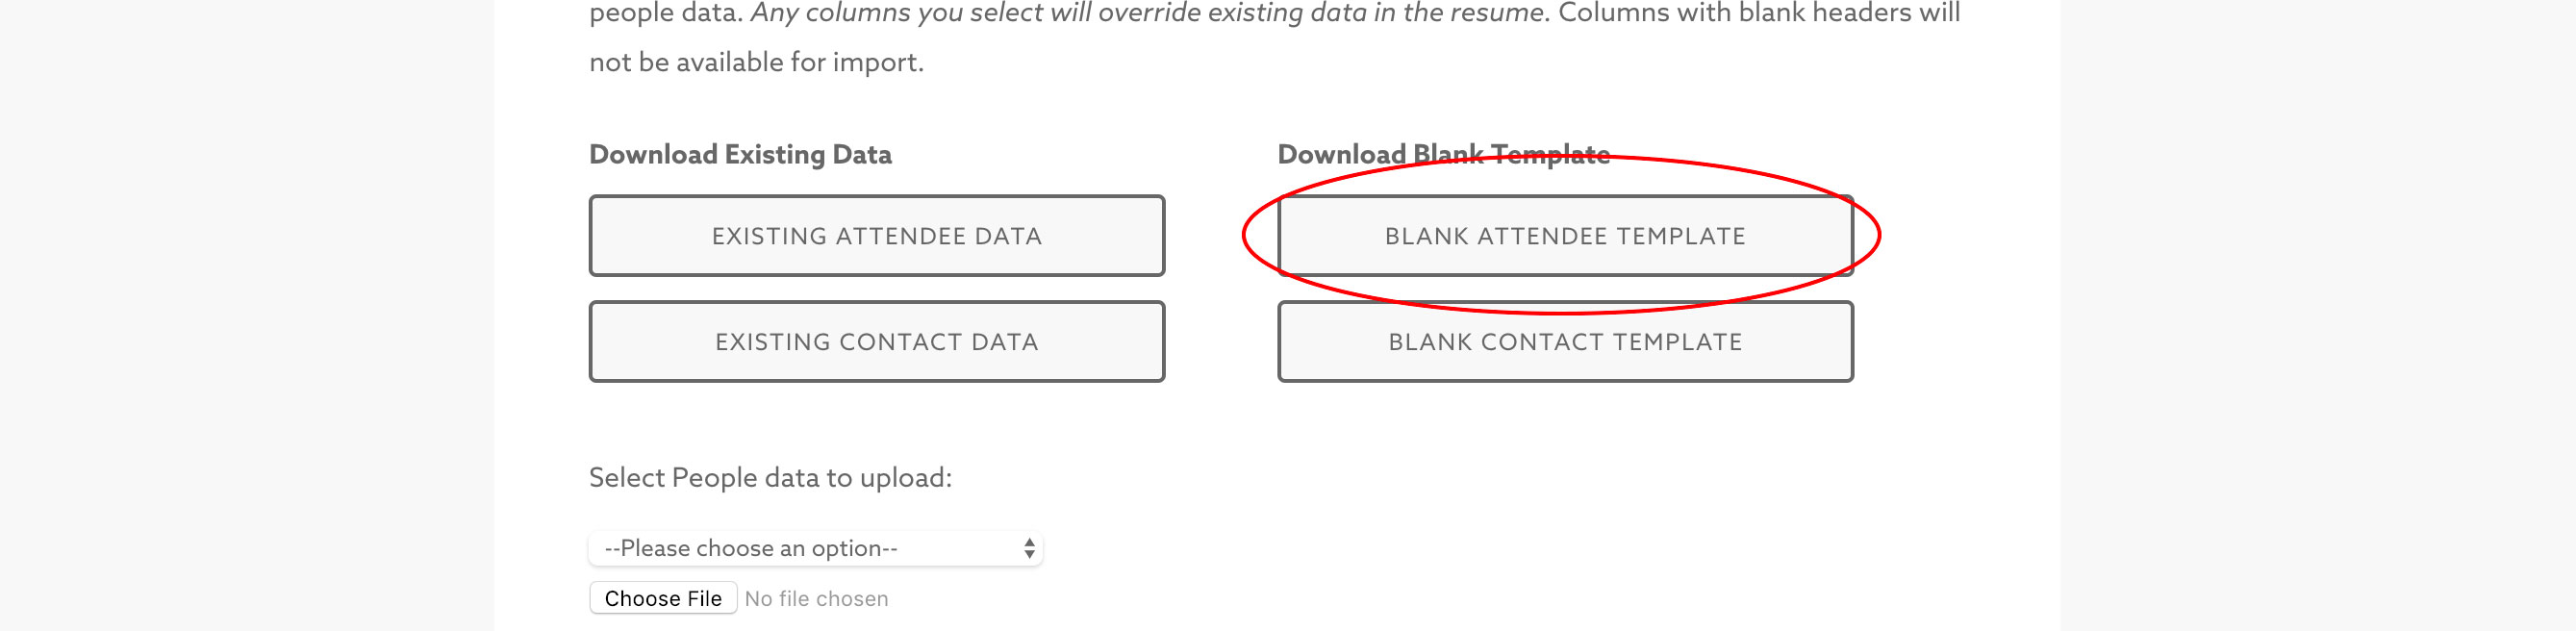 Select Blank Attendee Template